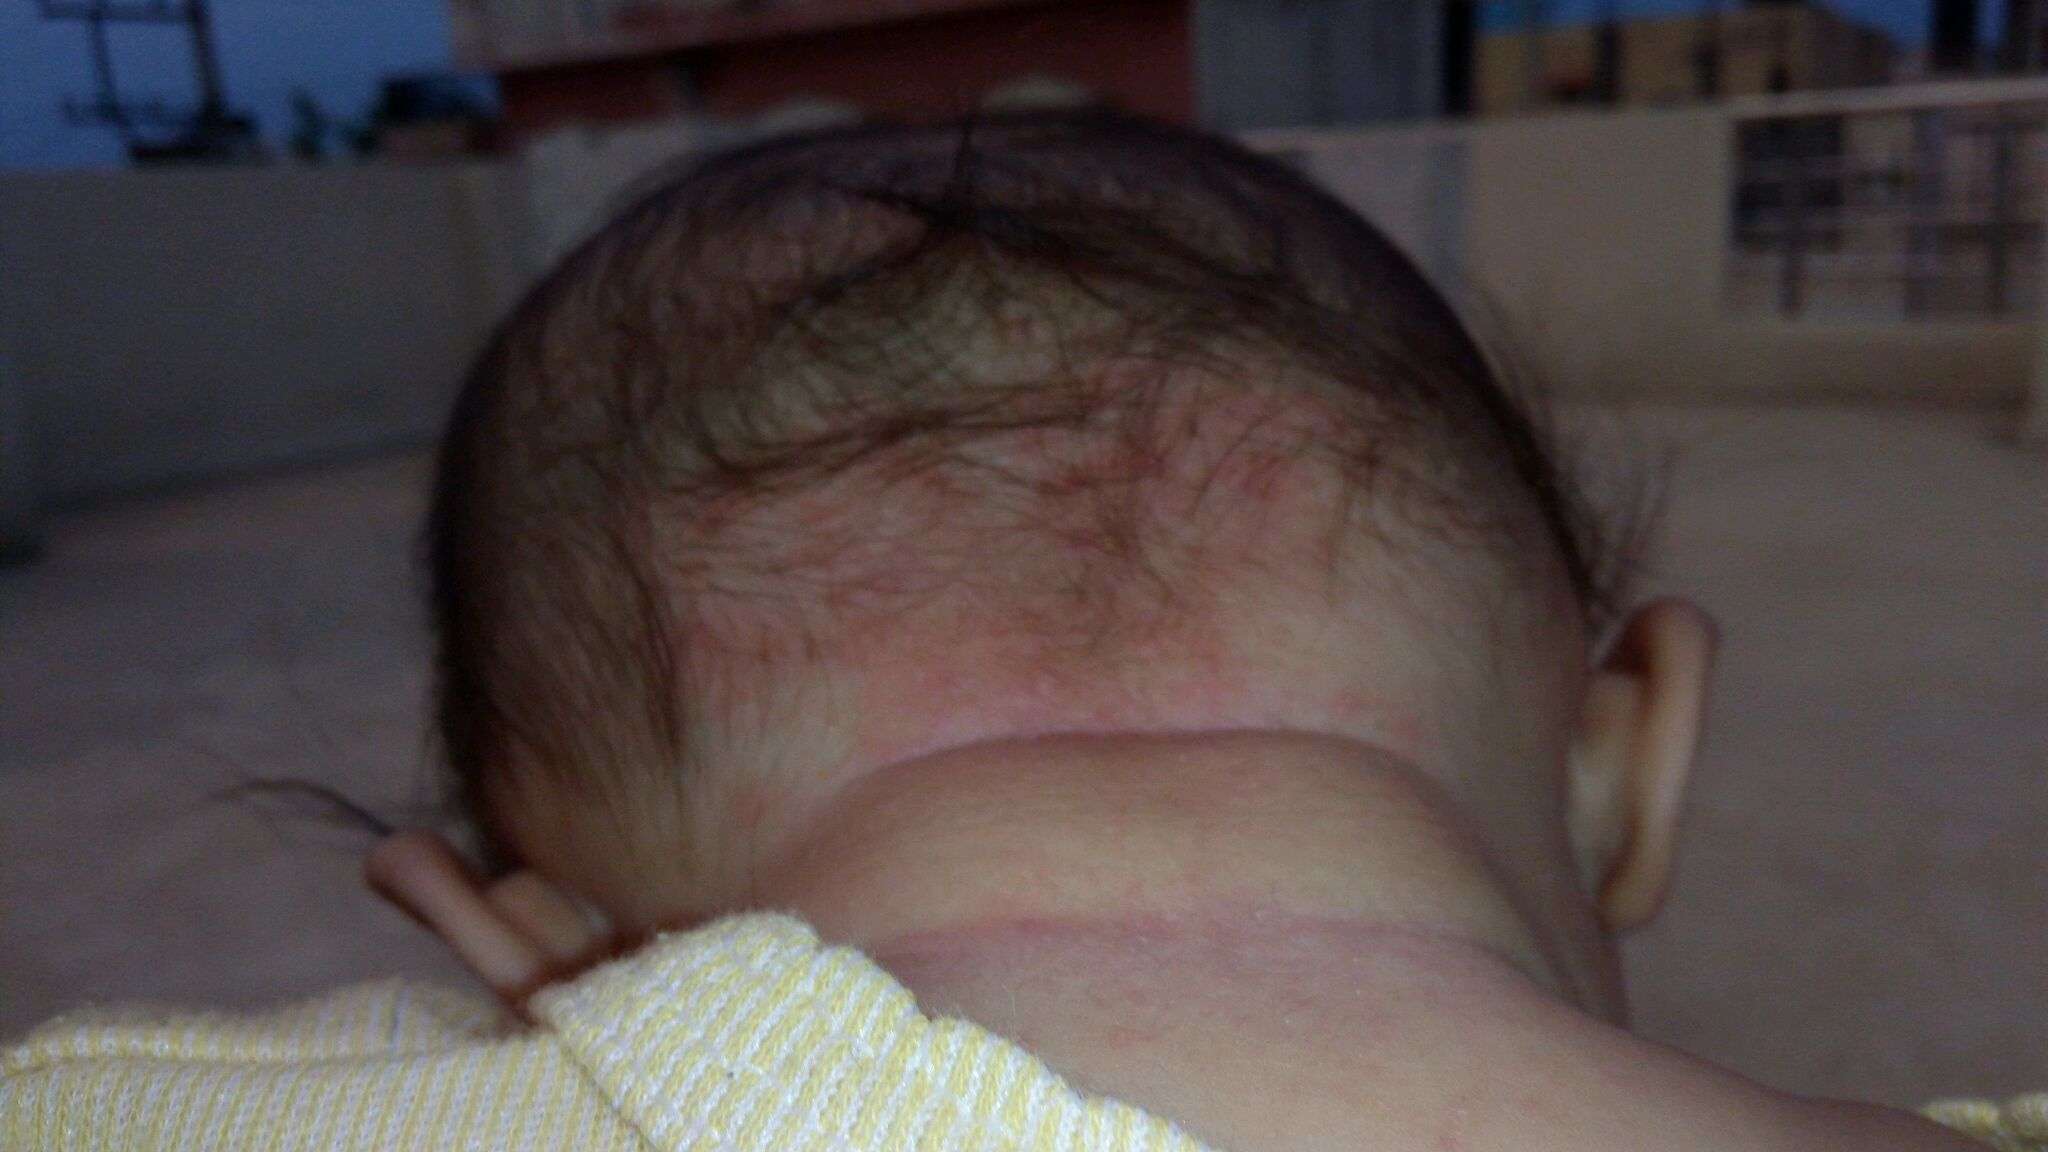 my baby got rashes on the back side of head since one week. plz suggest ...